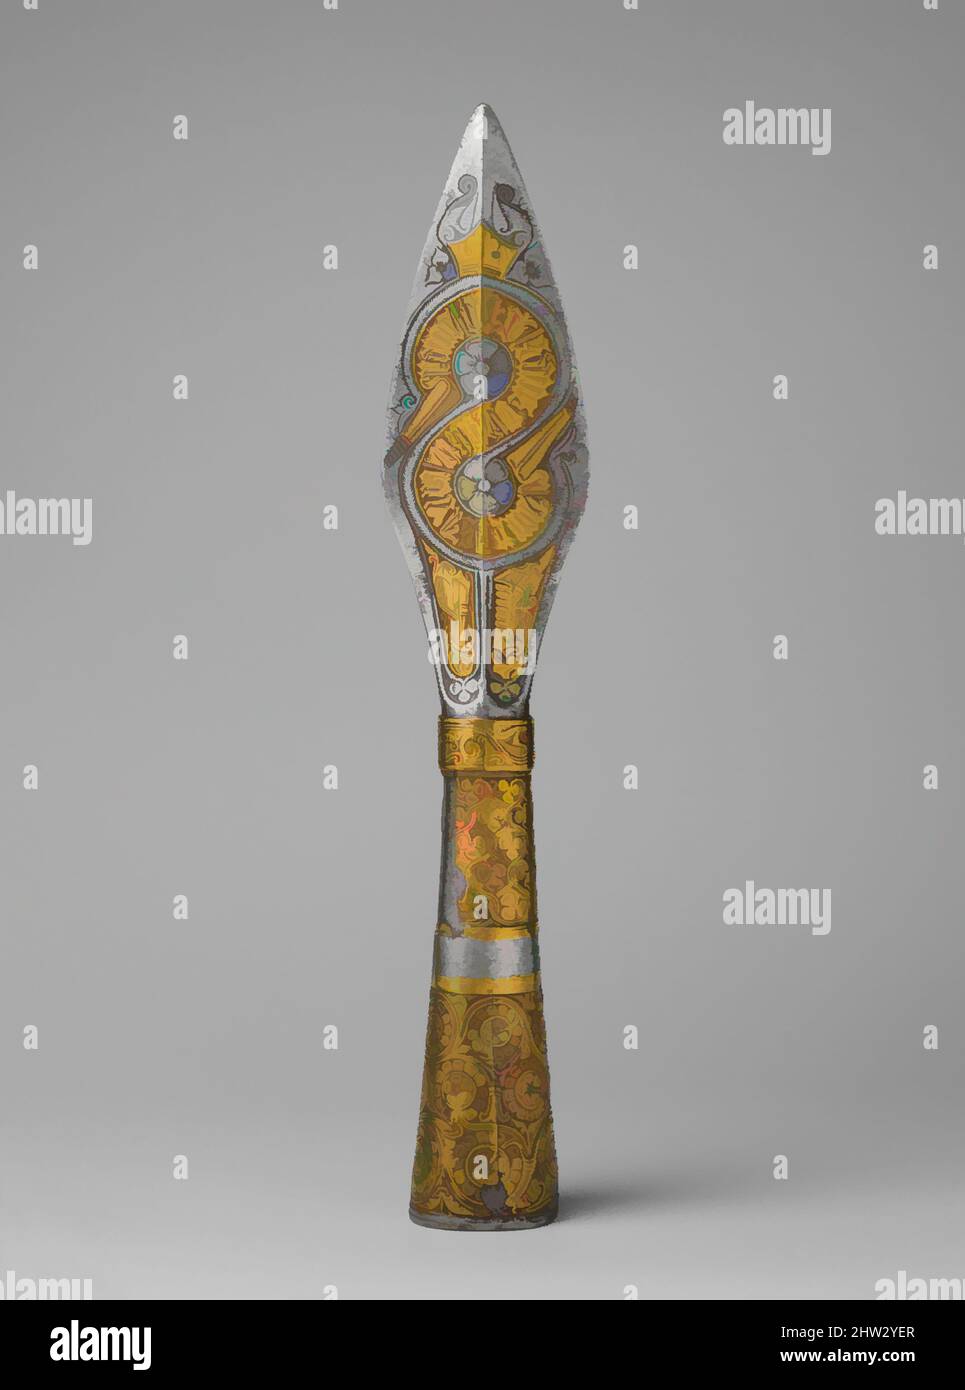 Art inspired by Ceremonial Arrowhead, 1437–39, probably Prague, Bohemian, probably Prague, Steel, copper alloy, L. 12 9/16 in. (31.9 cm); W. 2 7/16 in. (6.2 cm); Wt. 28.1 oz. (797 g), Archery Equipment-Arrows & Quivers, Originally mounted on a wooden shaft, this extremely large, Classic works modernized by Artotop with a splash of modernity. Shapes, color and value, eye-catching visual impact on art. Emotions through freedom of artworks in a contemporary way. A timeless message pursuing a wildly creative new direction. Artists turning to the digital medium and creating the Artotop NFT Stock Photo